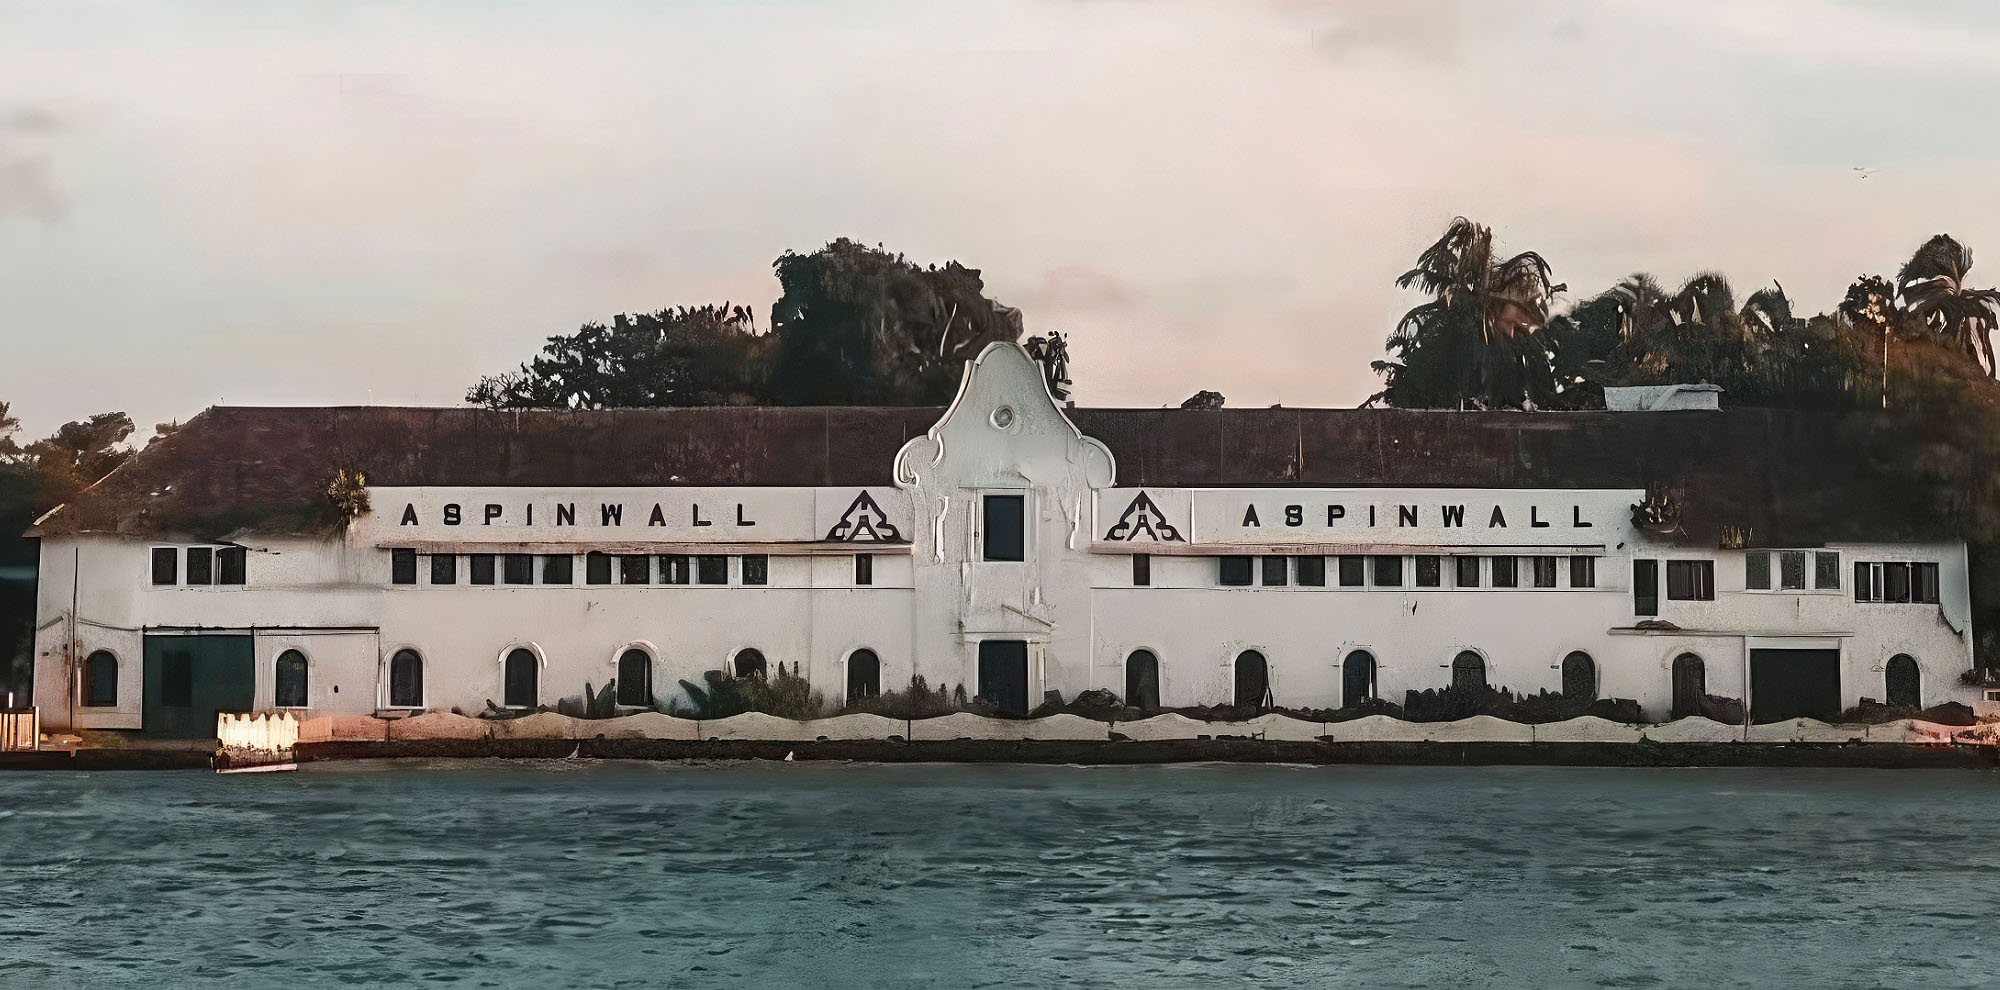 A sea-facing white building with a sloping roof and the English text ‘Aspinwall’ on the front facade.